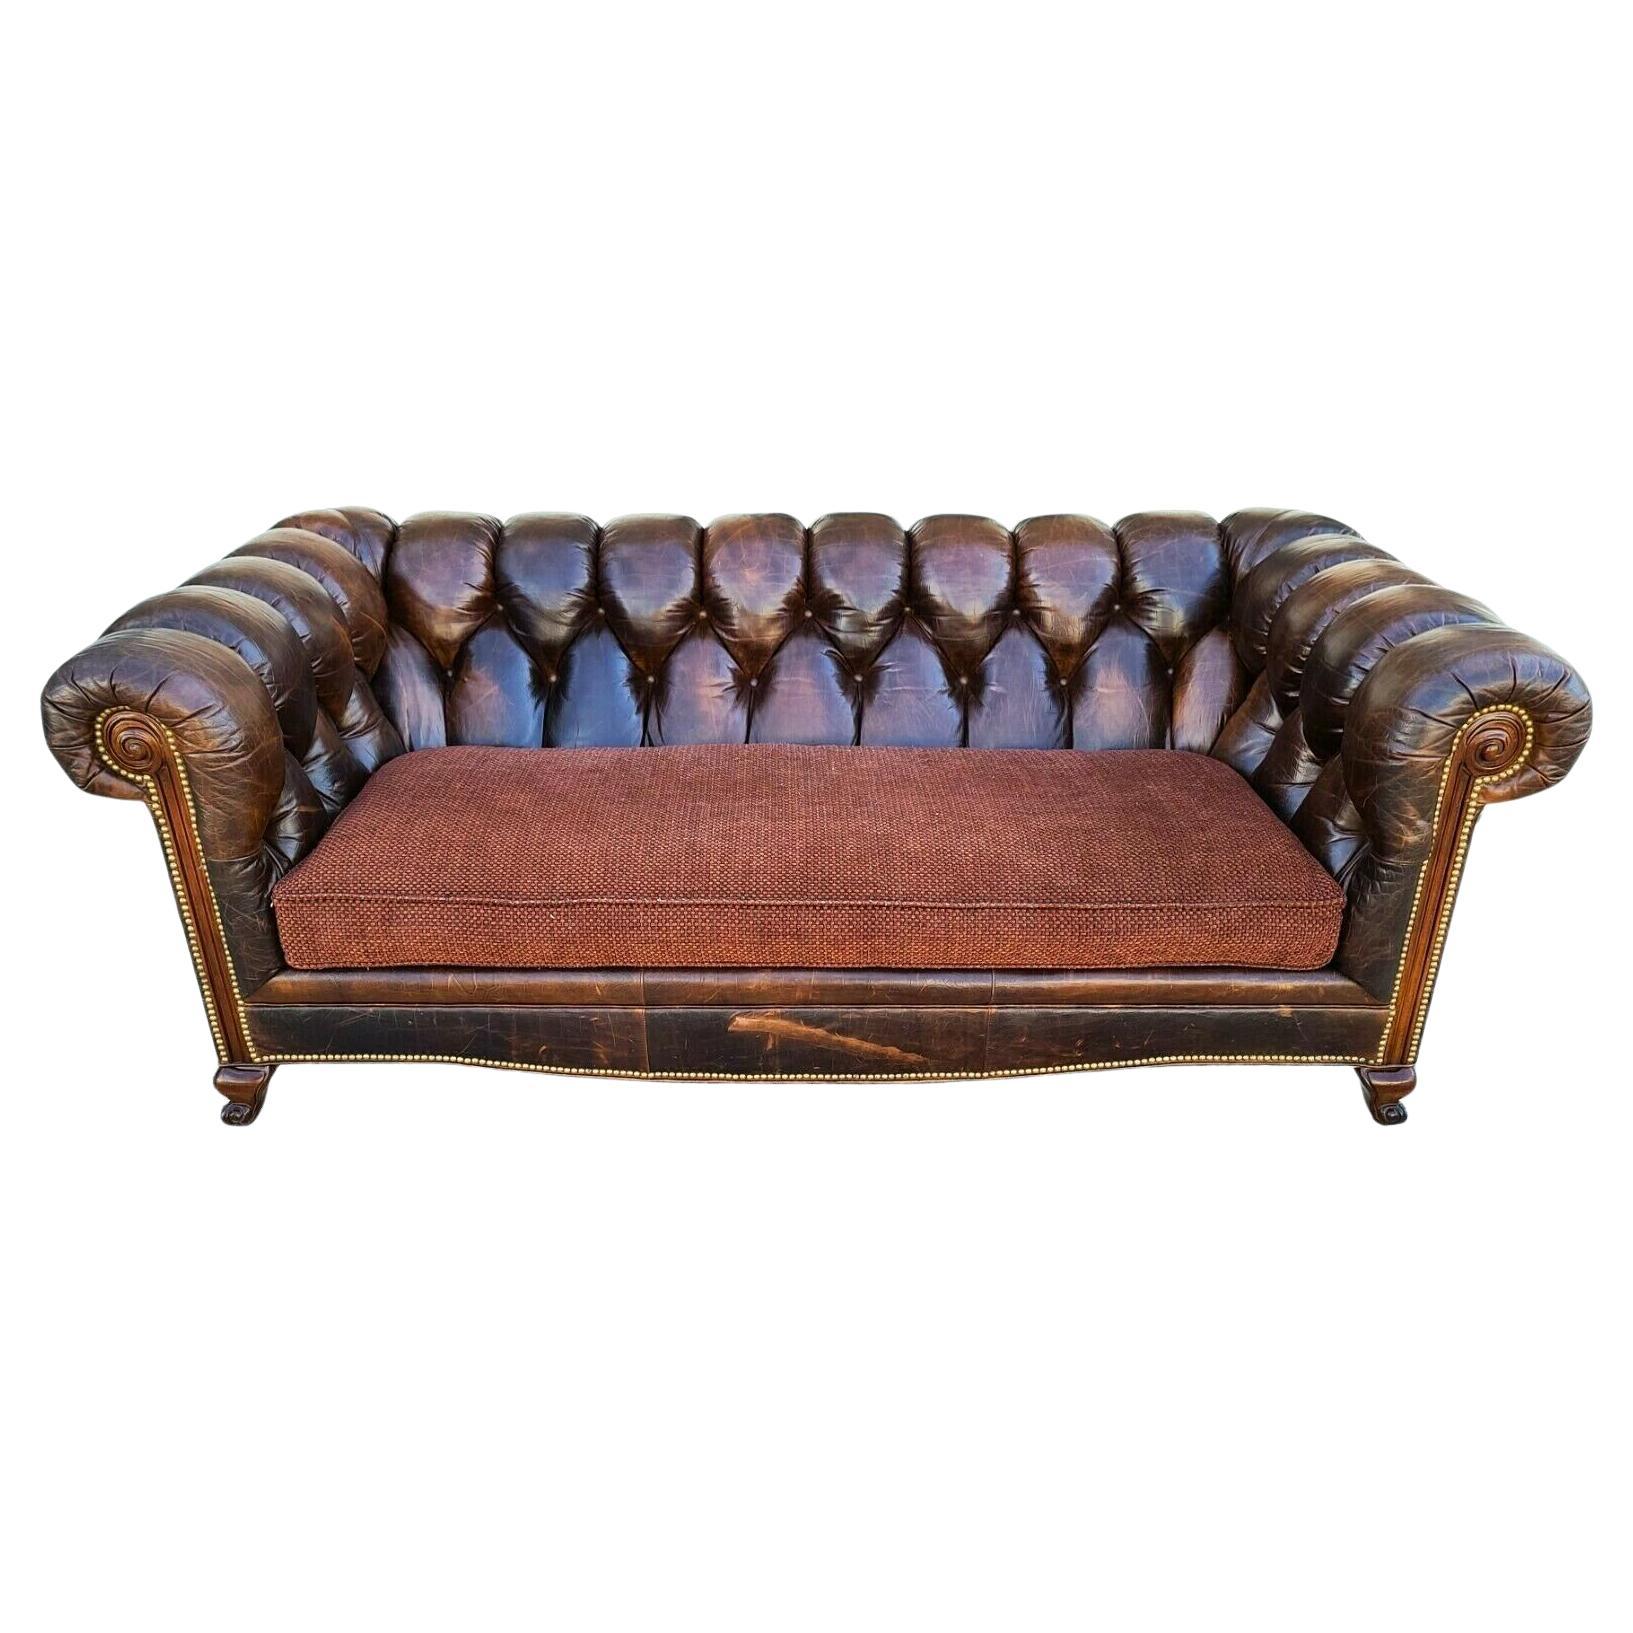 Chesterfield Tufted Distressed Leather Sofa by Wesley Hall